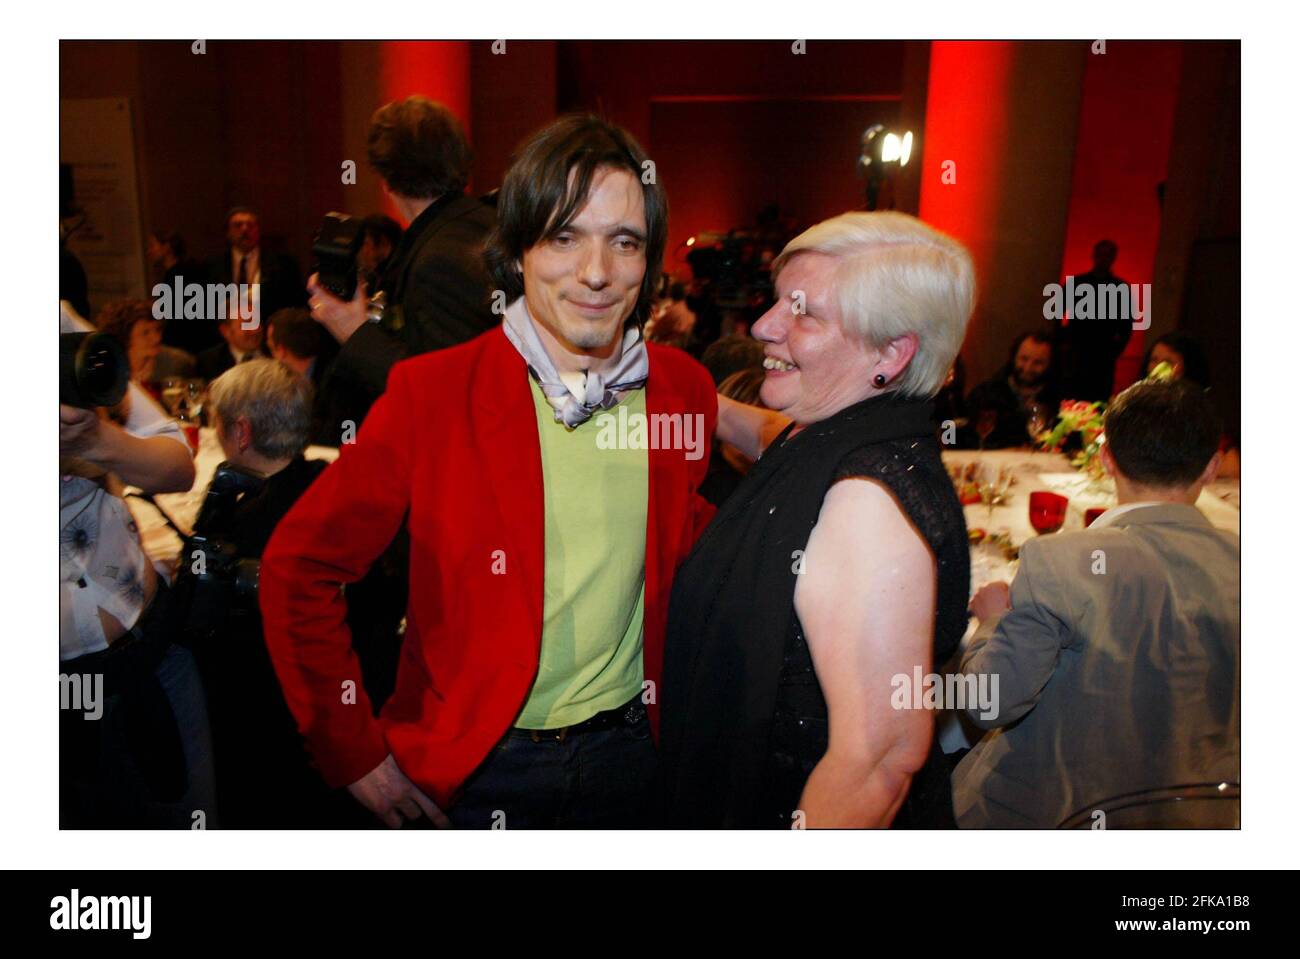 Jeremy Deller with his Turner prize work at the Tate Britain. congratulated by his mumpic David sandison 6/6/2004. Stock Photo